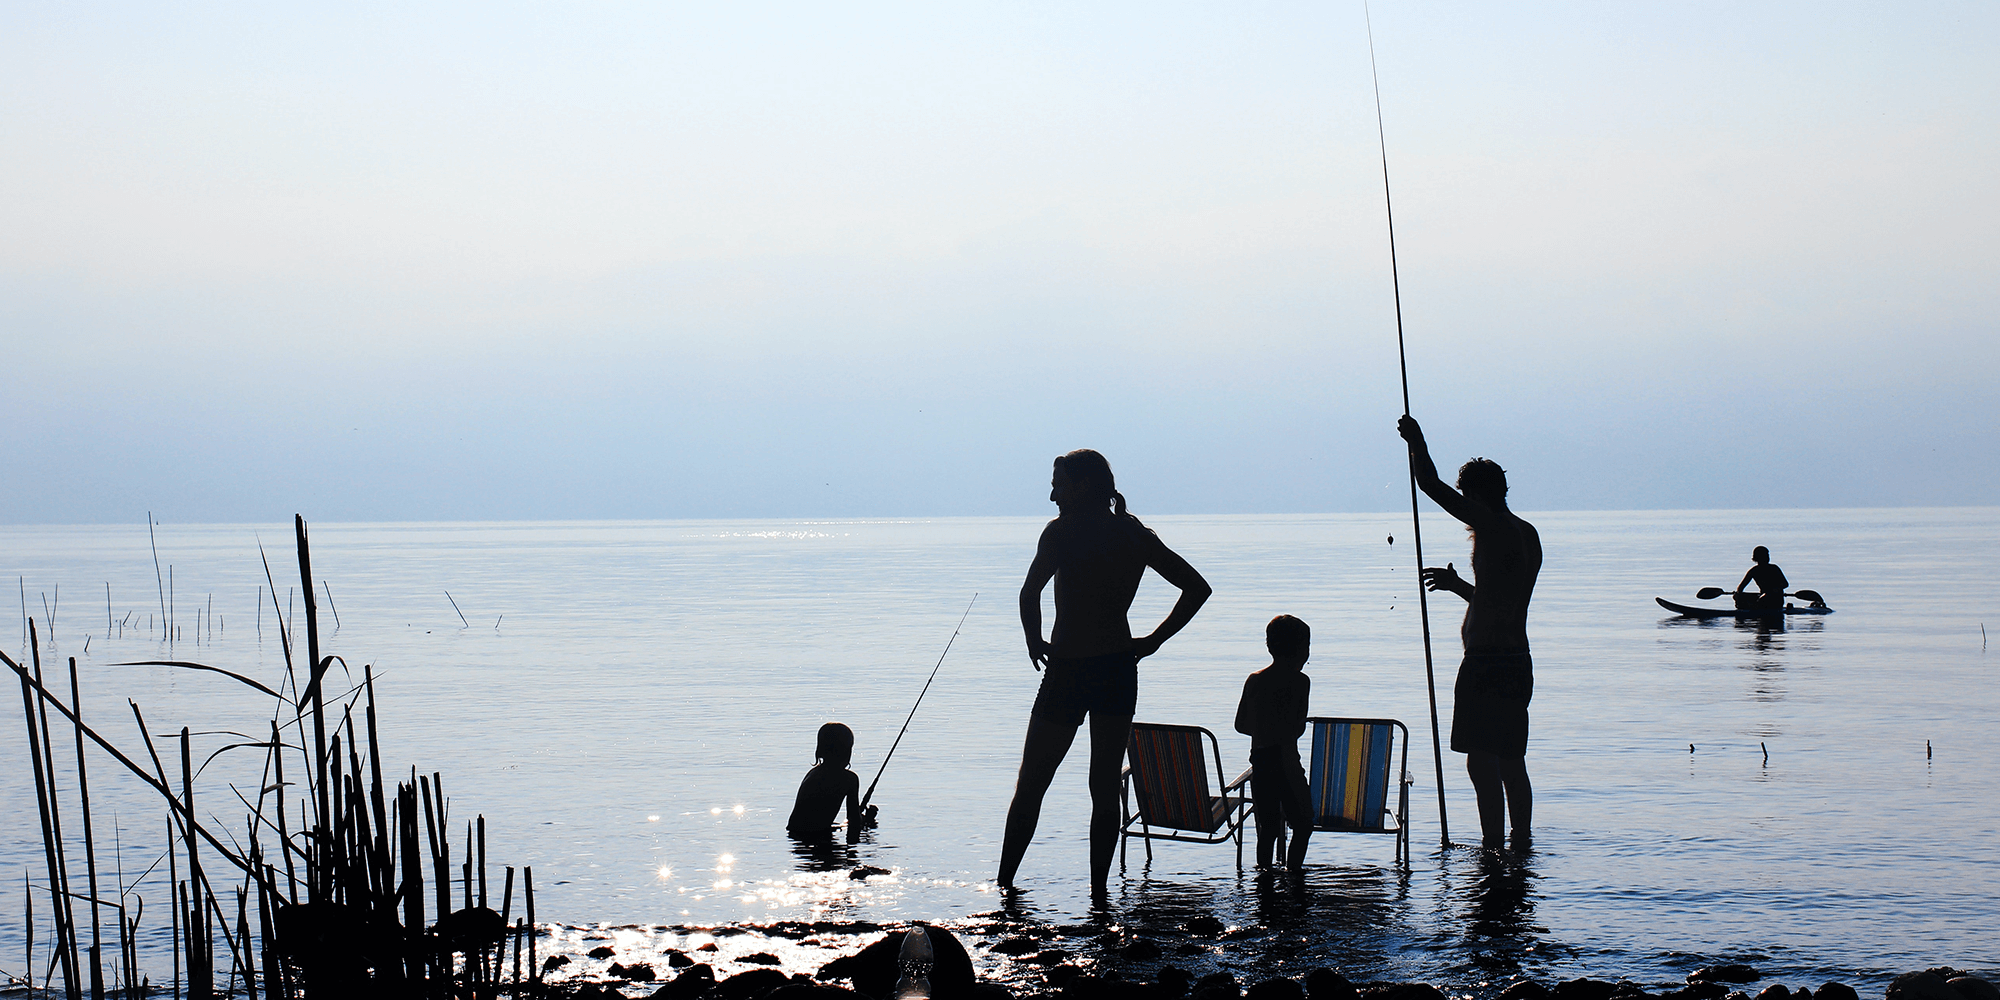 A family of four is fishing on the beach together.